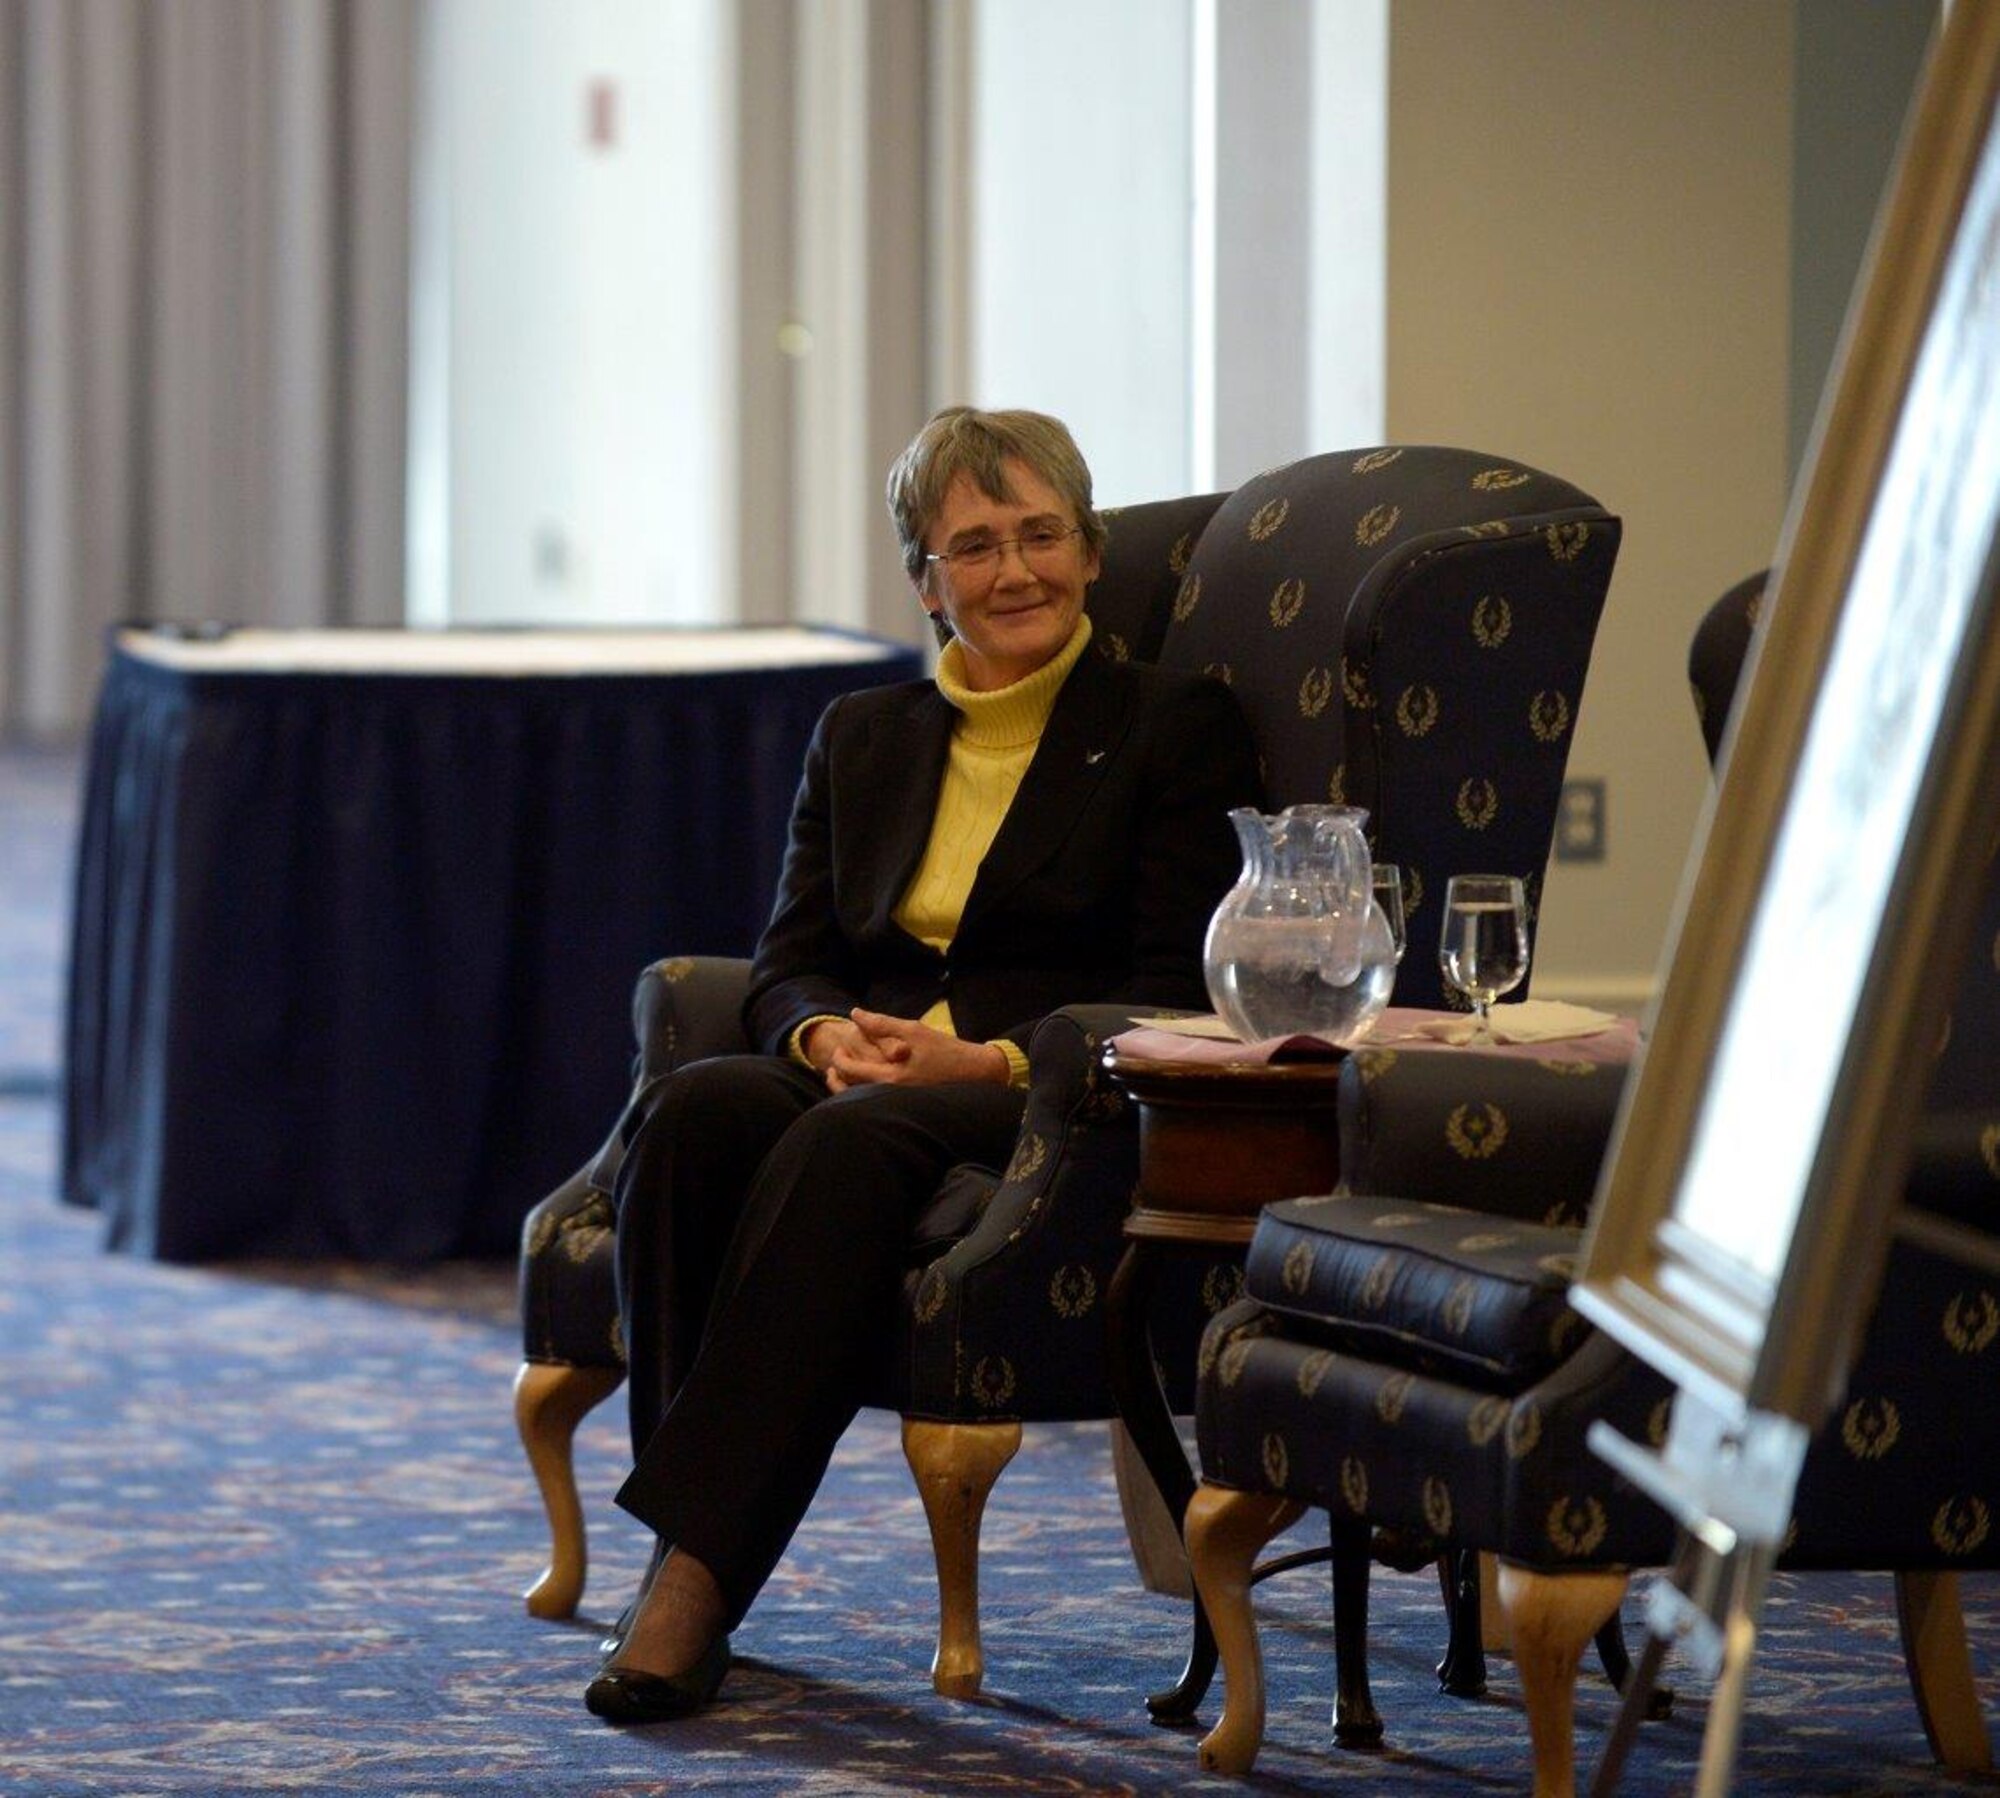 Secretary of the Air Force Heather Wilson listens as former SecAF Deborah Lee James speaks during her portrait unveiling ceremony at Joint Base Anacostia-Bolling, Washington, D.C., April 6, 2018. During the ceremony, Wilson spoke about James’ leadership and dedication to the military. (U.S. Air Force photo by Staff Sgt. Rusty Frank)